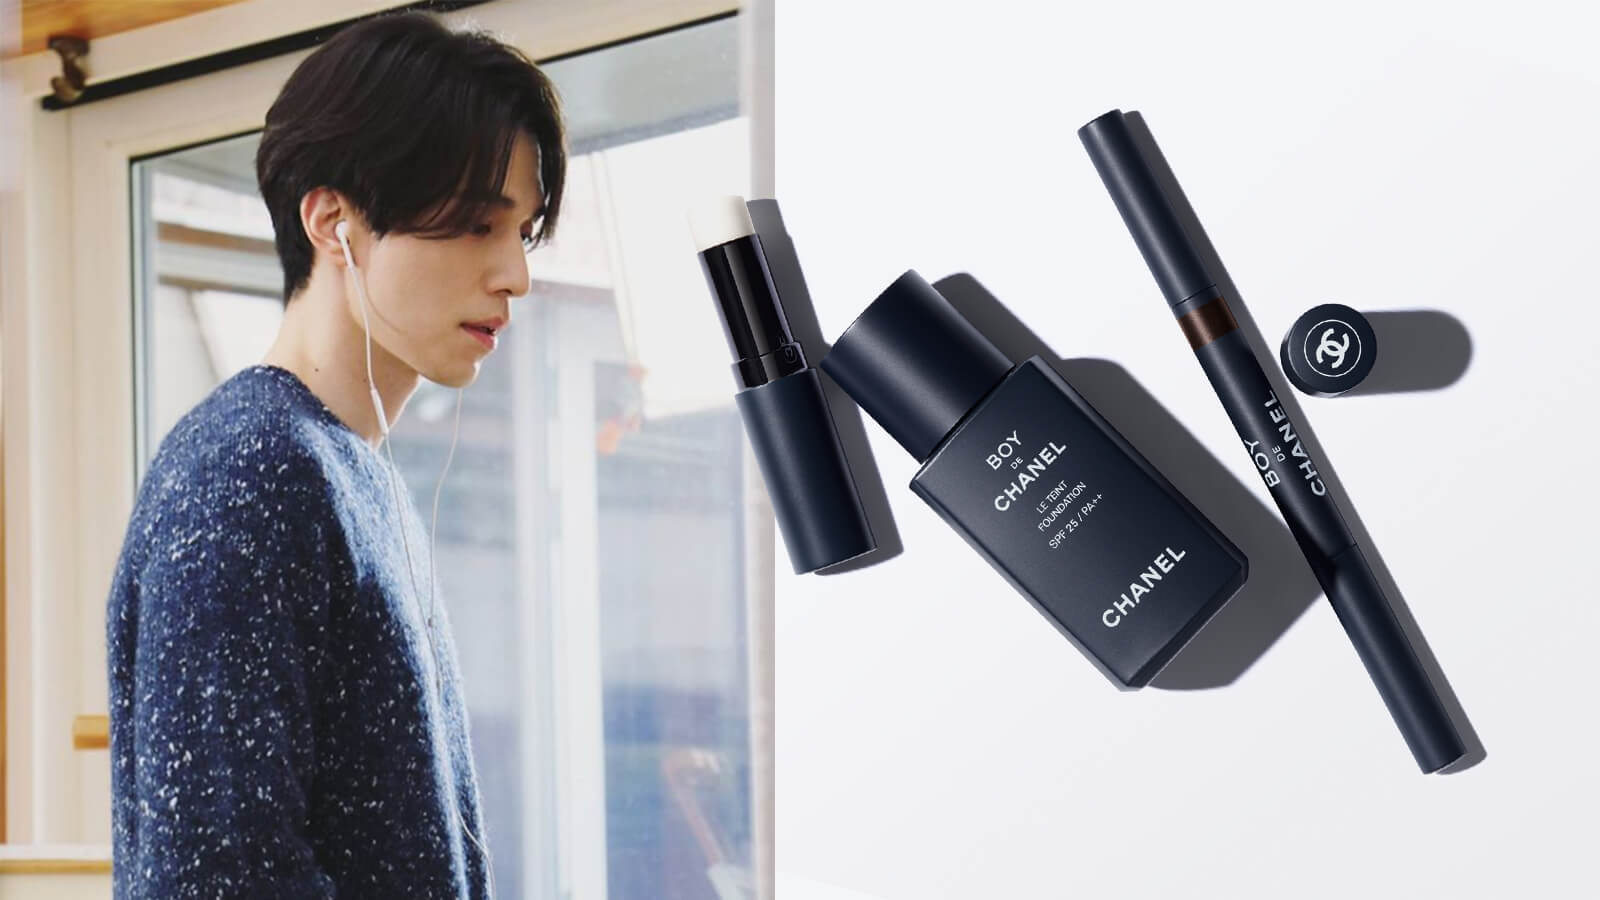 Boy de Chanel releases new skin and makeup products for 2020